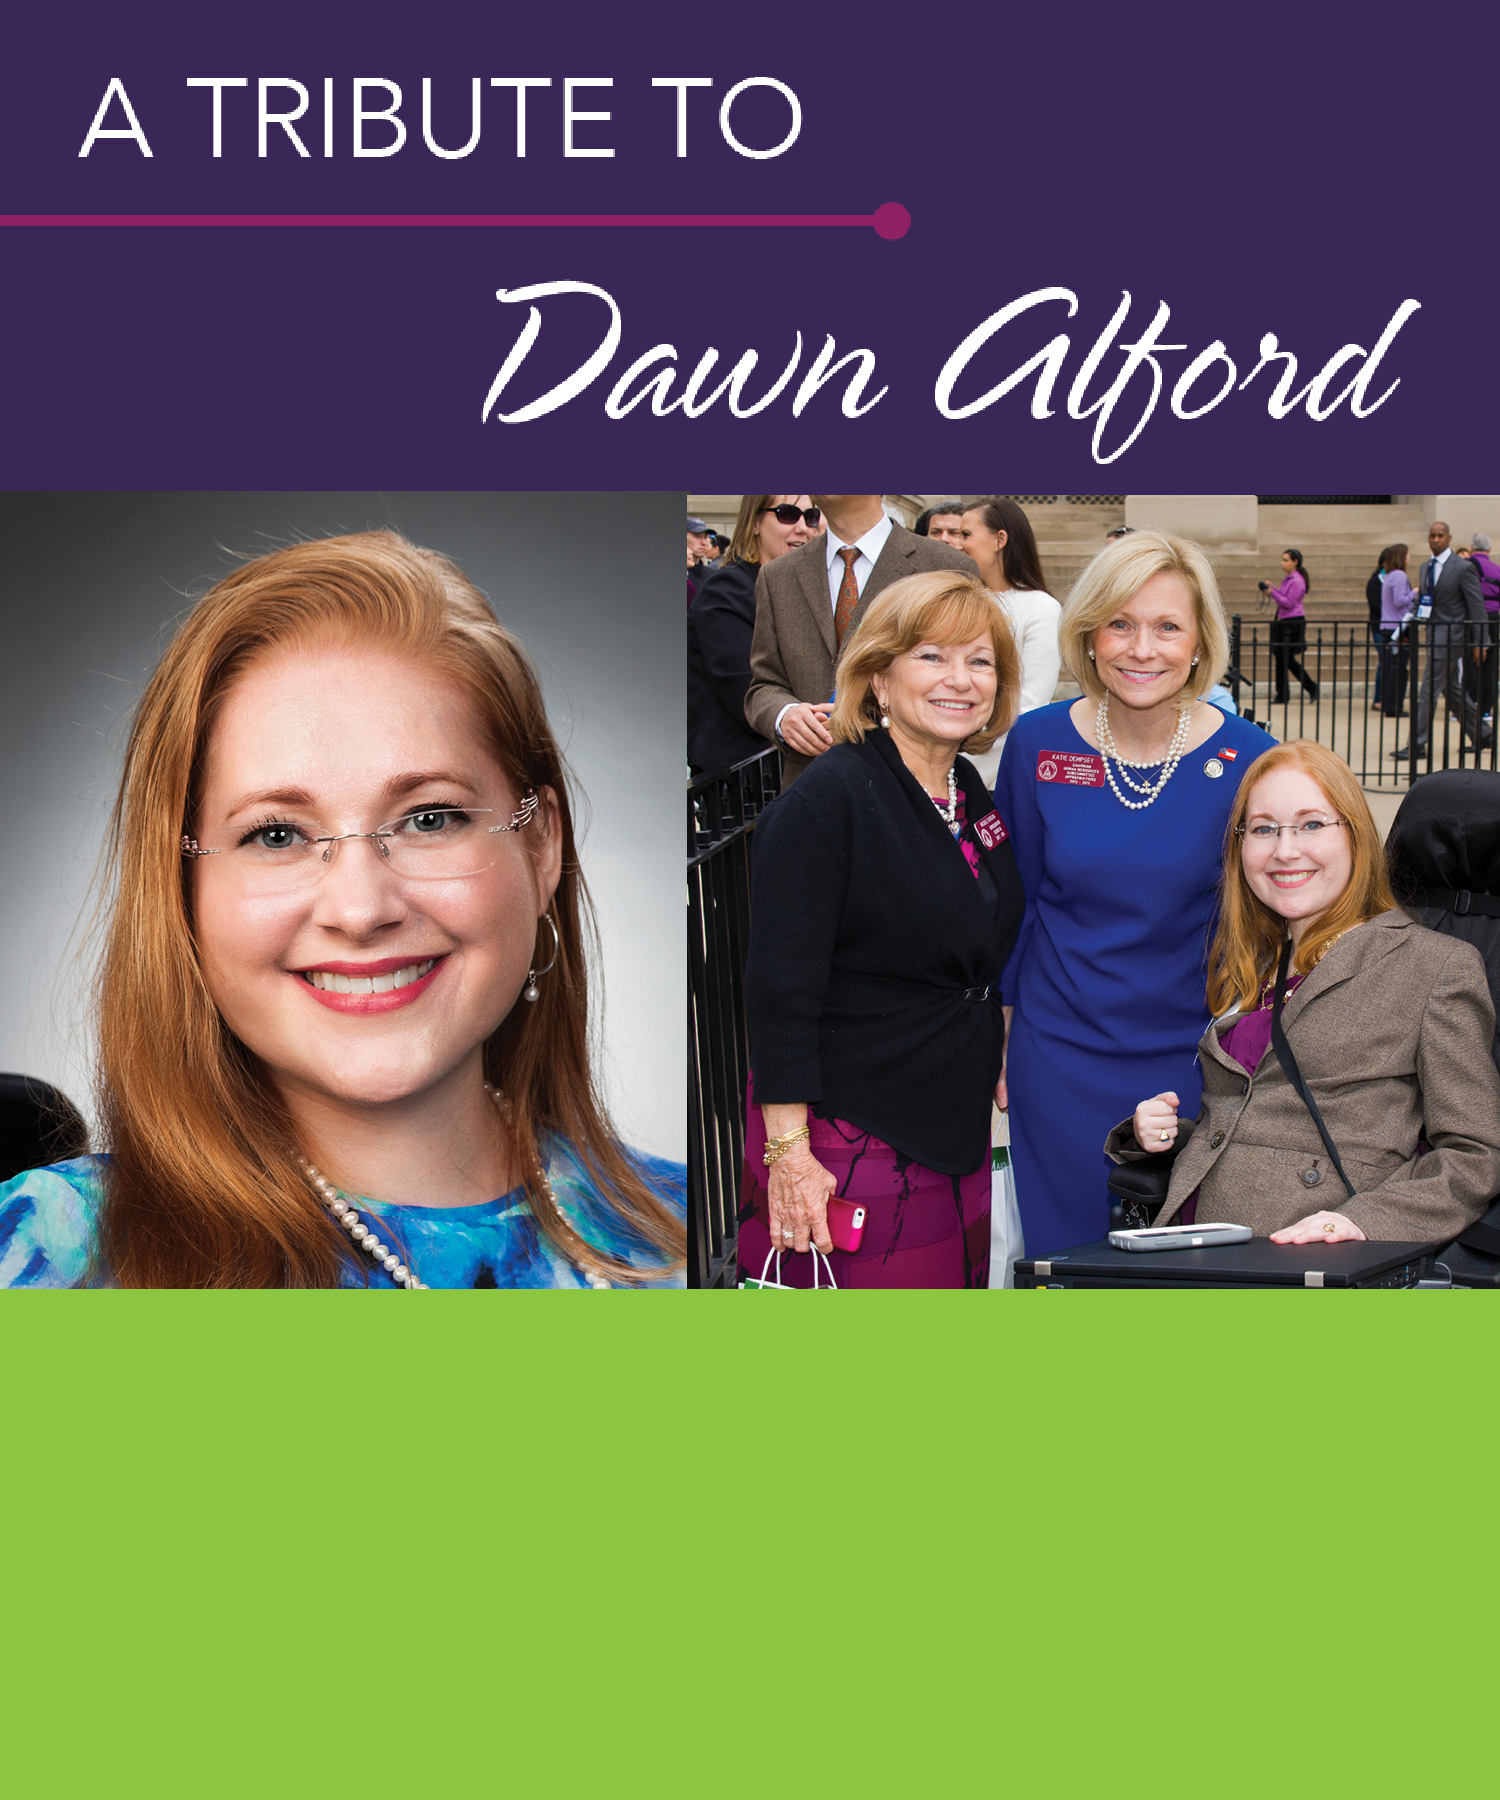 In July 2019, GCDD unexpectedly said goodbye to an amazing, hard-working advocate for people with developmental disabilities. Dawn Alford, GCDD’s Public Policy Director, left a legacy on disability rights and established strong long-lasting relationships with legislators and people across the state. GCDD honored Dawn and her impact in photos and memories.